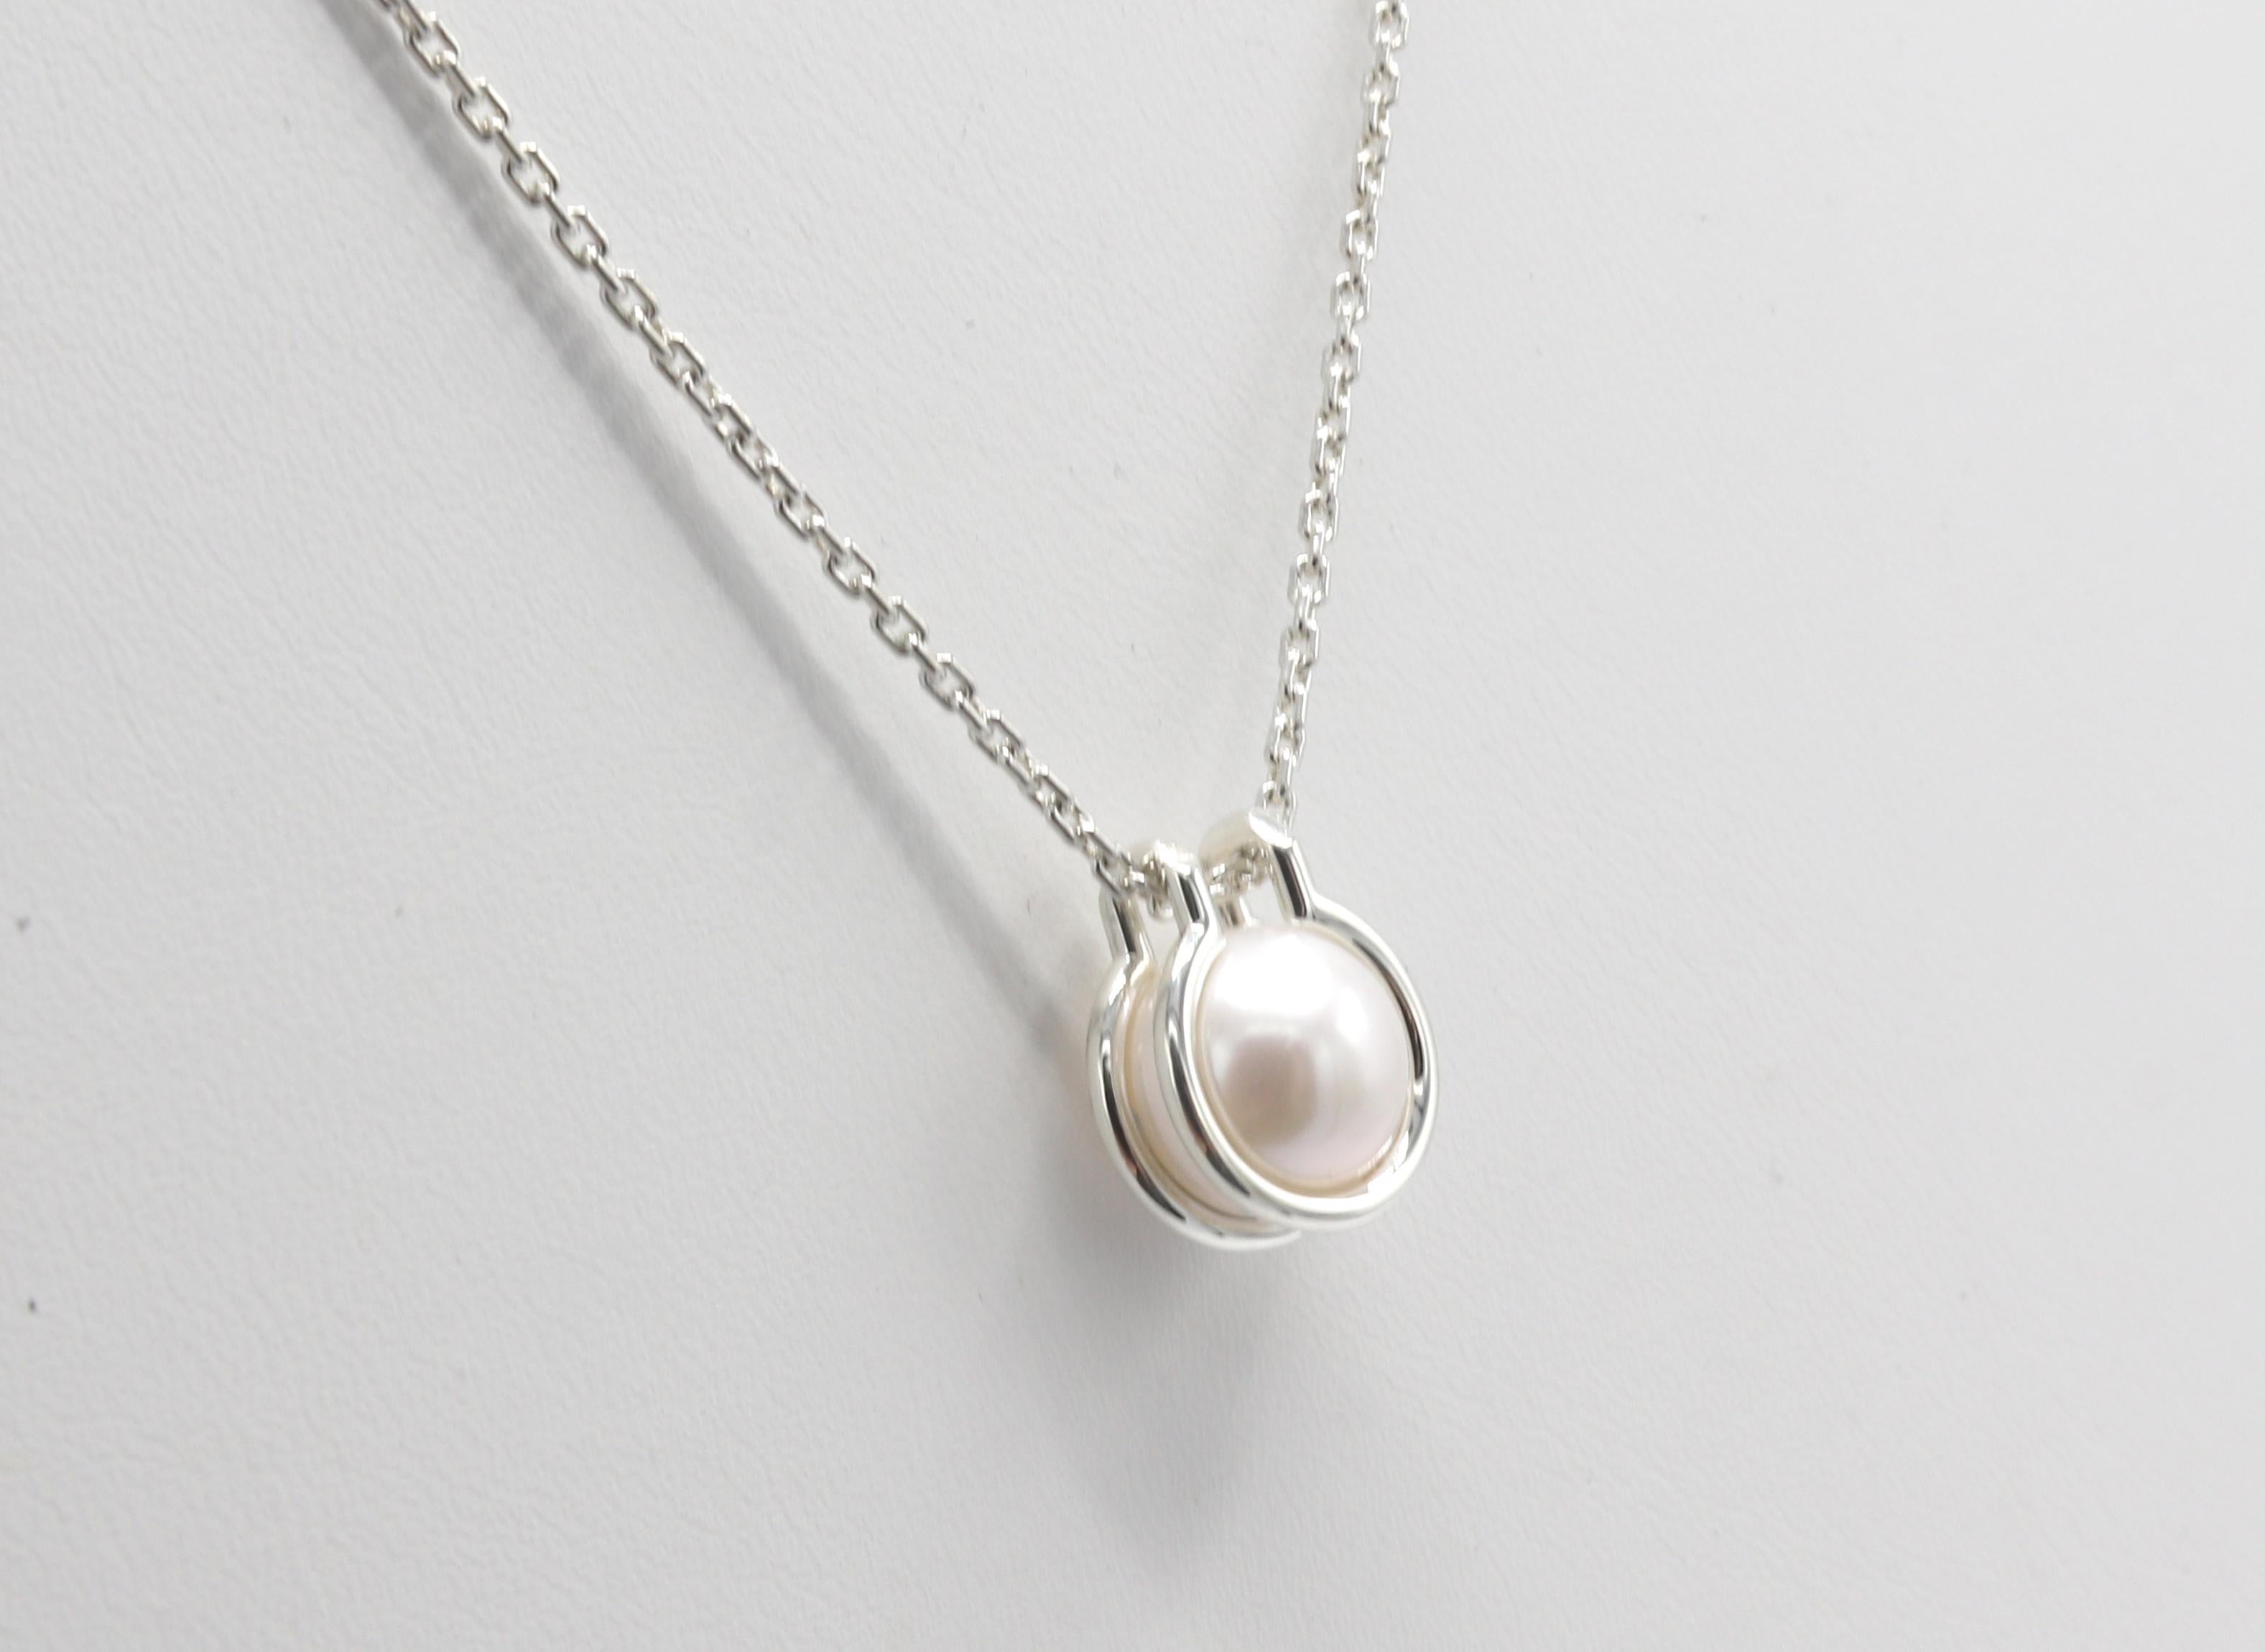 Tiffany & Co. Hardwear Freshwater Pearl Sterling Silver Pendant Drop Necklace 
Metal: Sterling silver
Weight: 5.5 grams
Pearl: Freshwater, 9mm
Pendant: 11.5 x 14mm
Chain: 18 - 16 inches (adjustable)
Retail: $675 USD
Signed: Tiffany & Co. Ag925